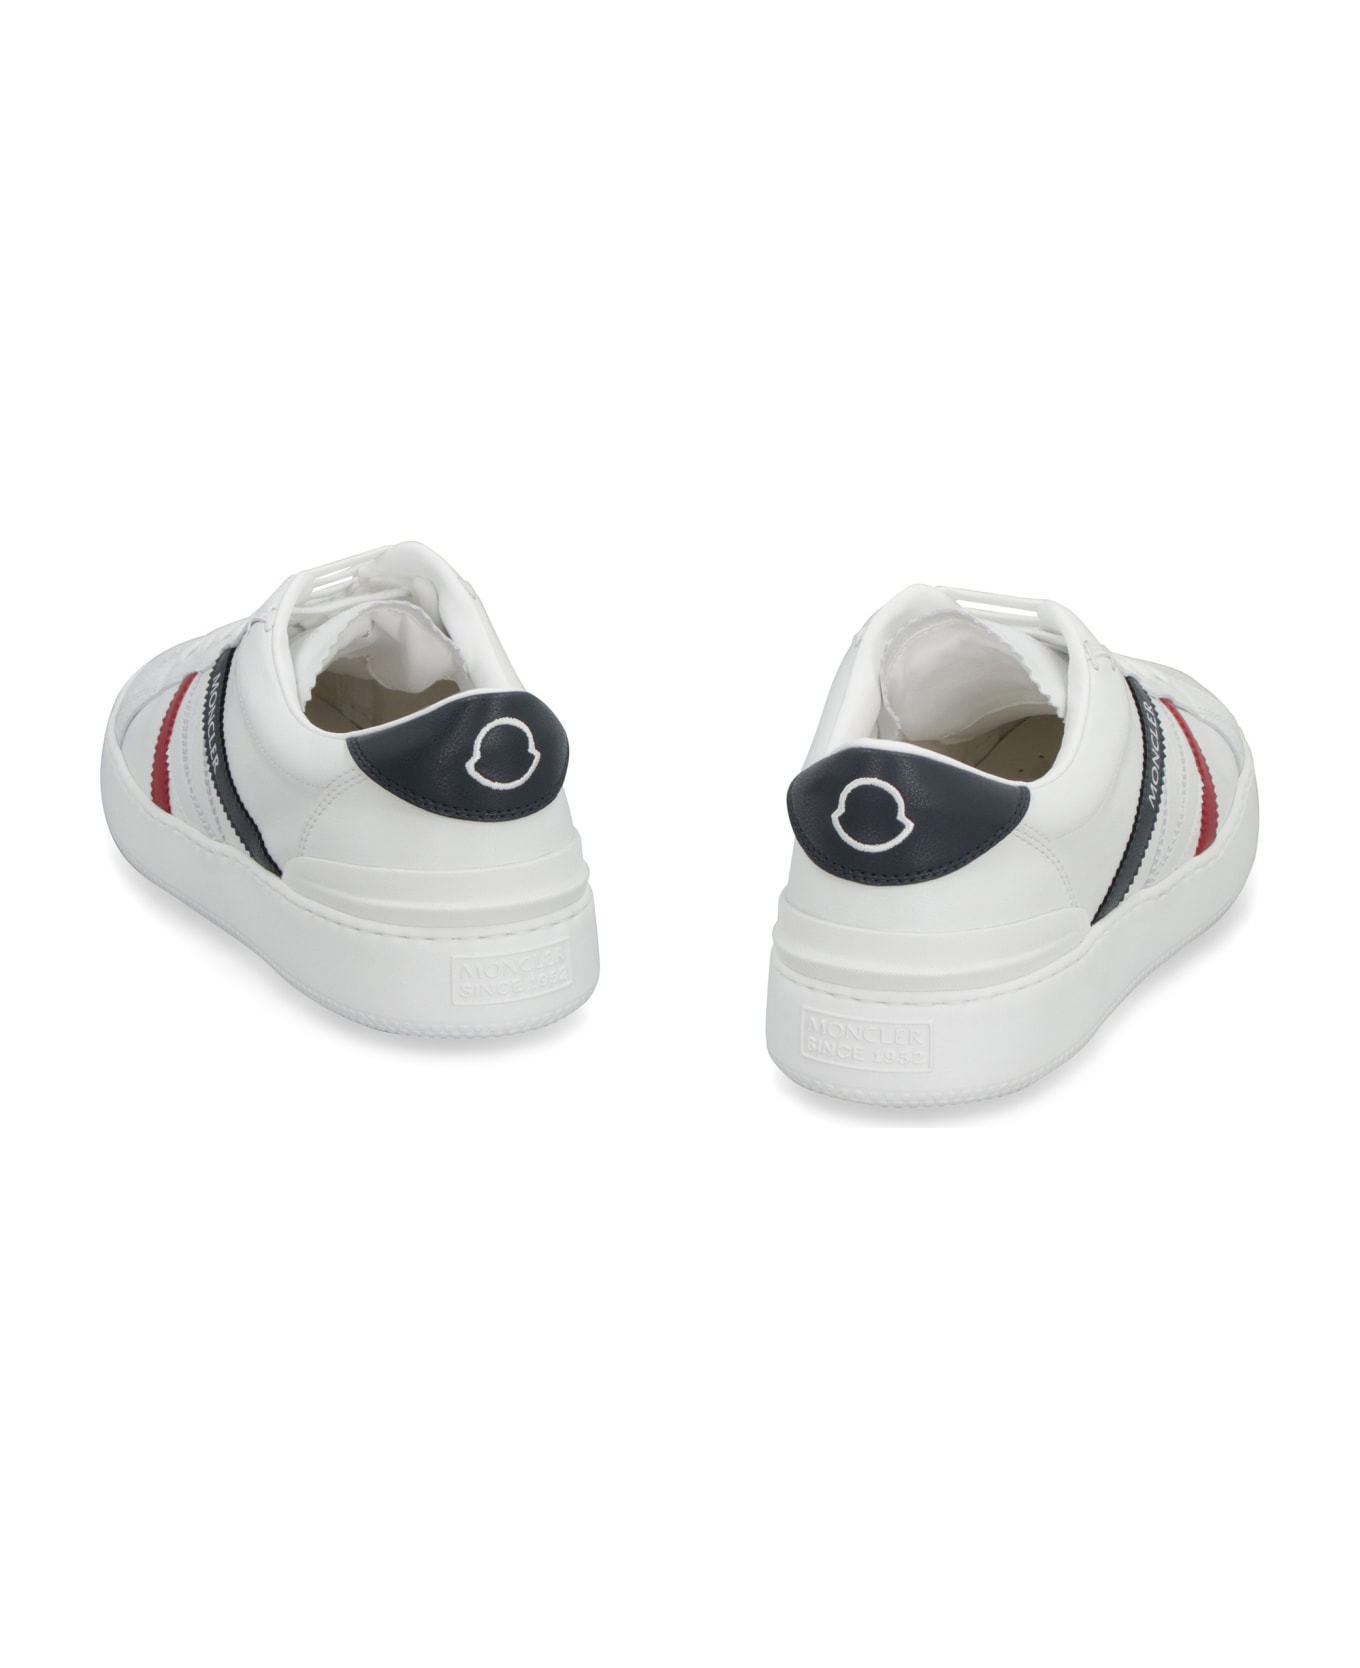 Moncler Monaco Leather Low-top Sneakers - Bianco